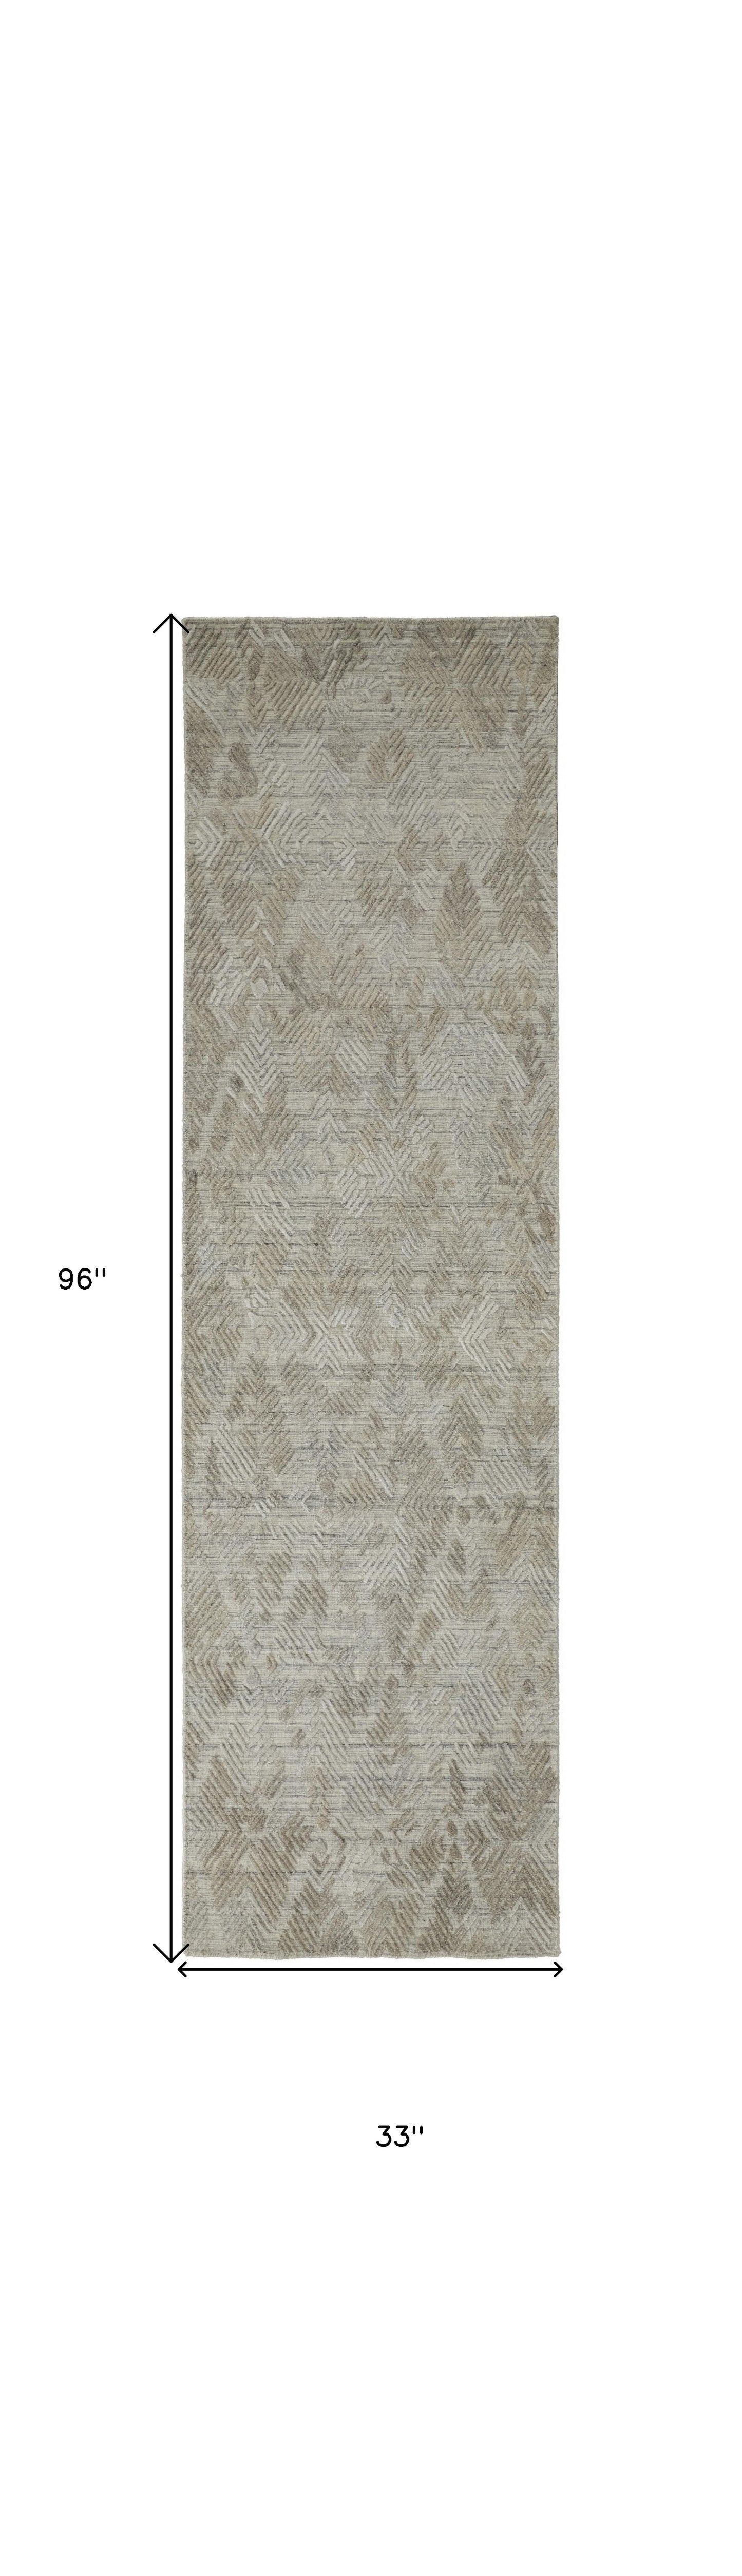 5' X 8' Gray And Taupe Abstract Hand Woven Area Rug